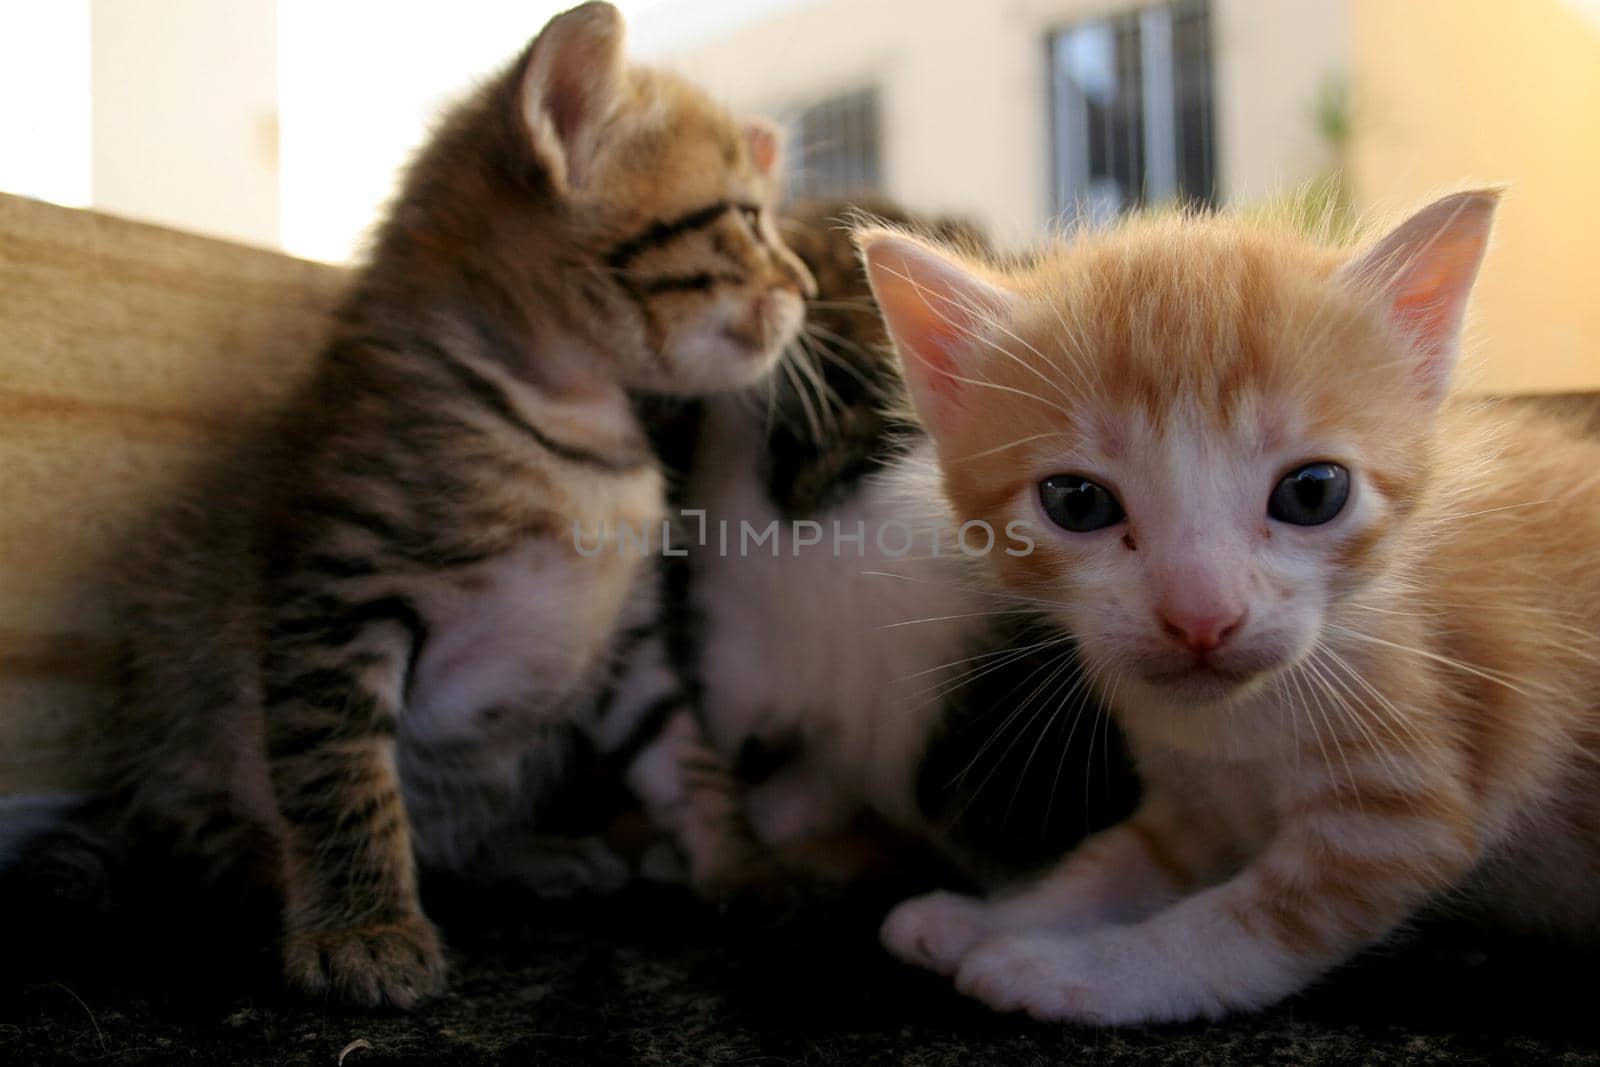 kittens in wooden crate by joasouza